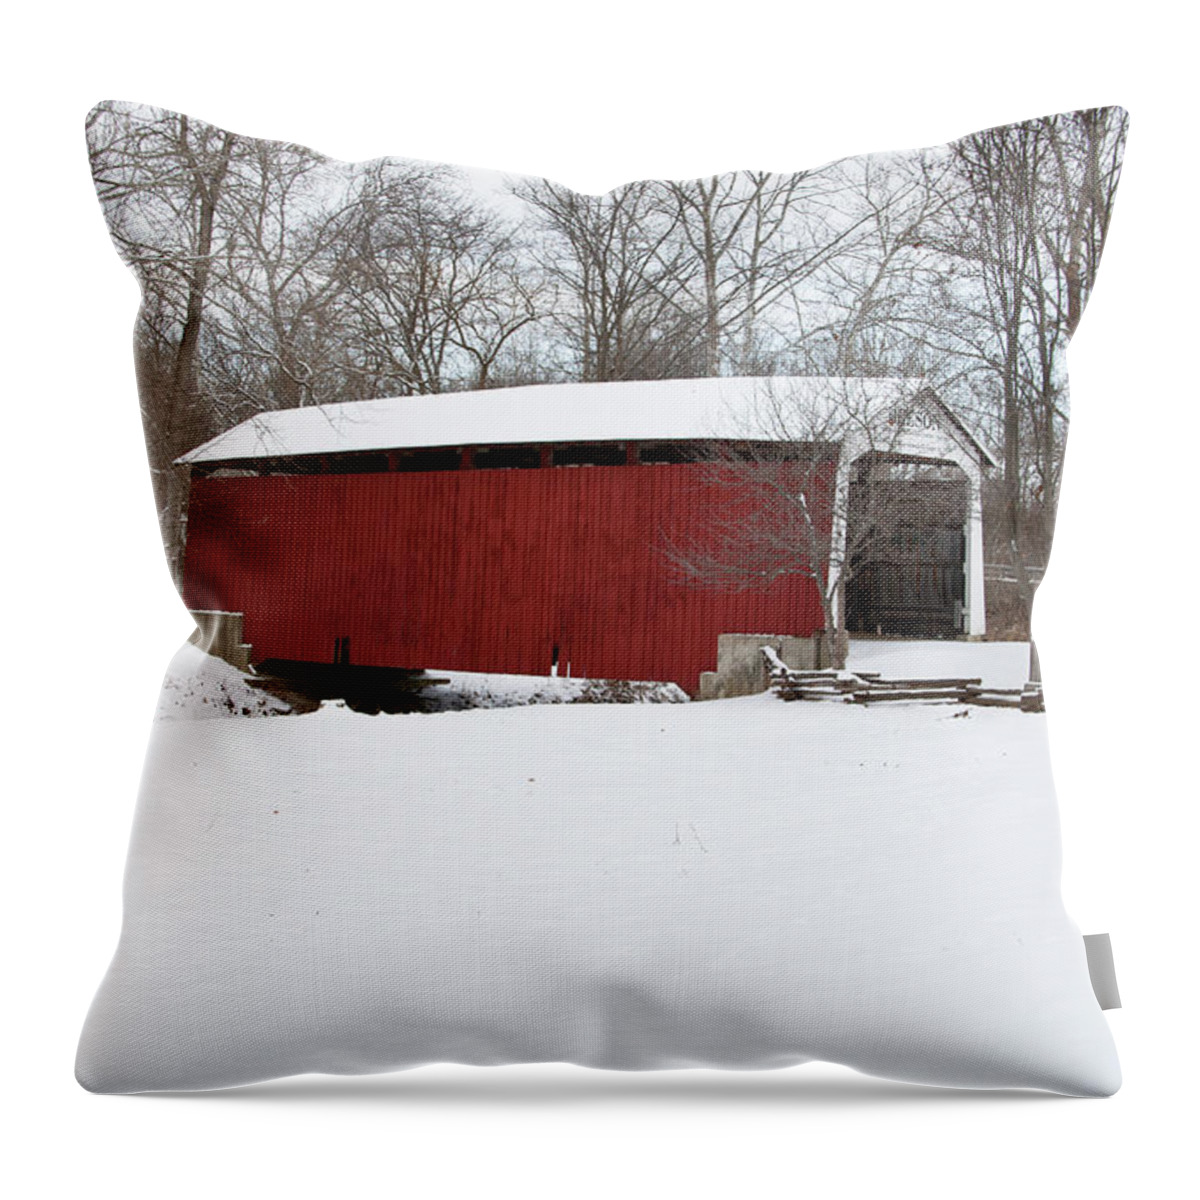 Photography Throw Pillow featuring the photograph Covered Bridge In Snow Covered Forest by Panoramic Images